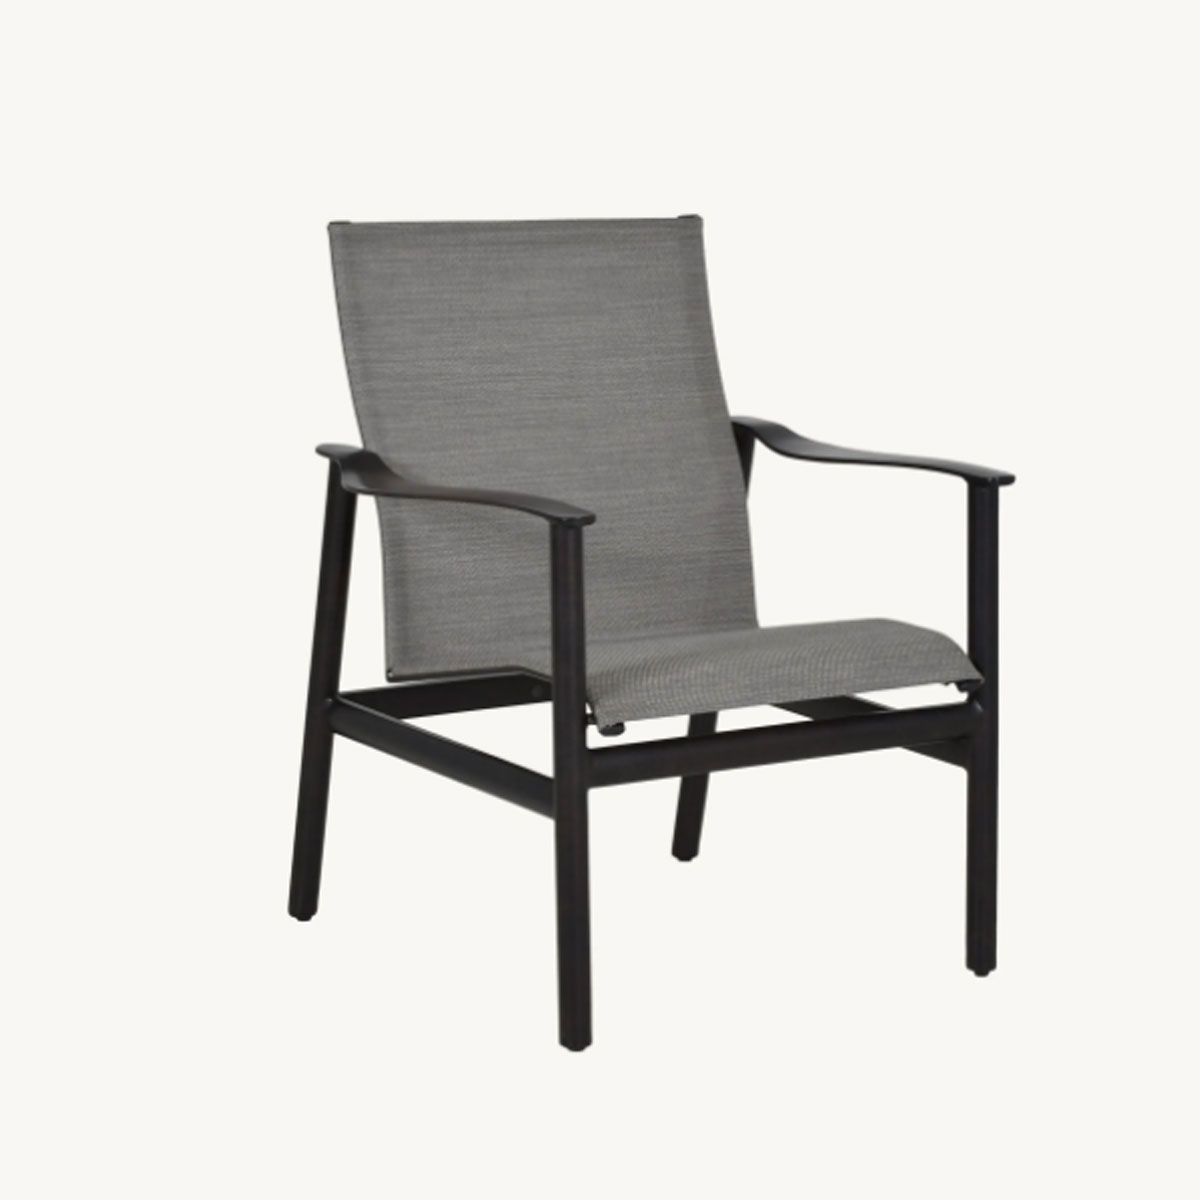 Castelle Barbados Sling Dining Chair